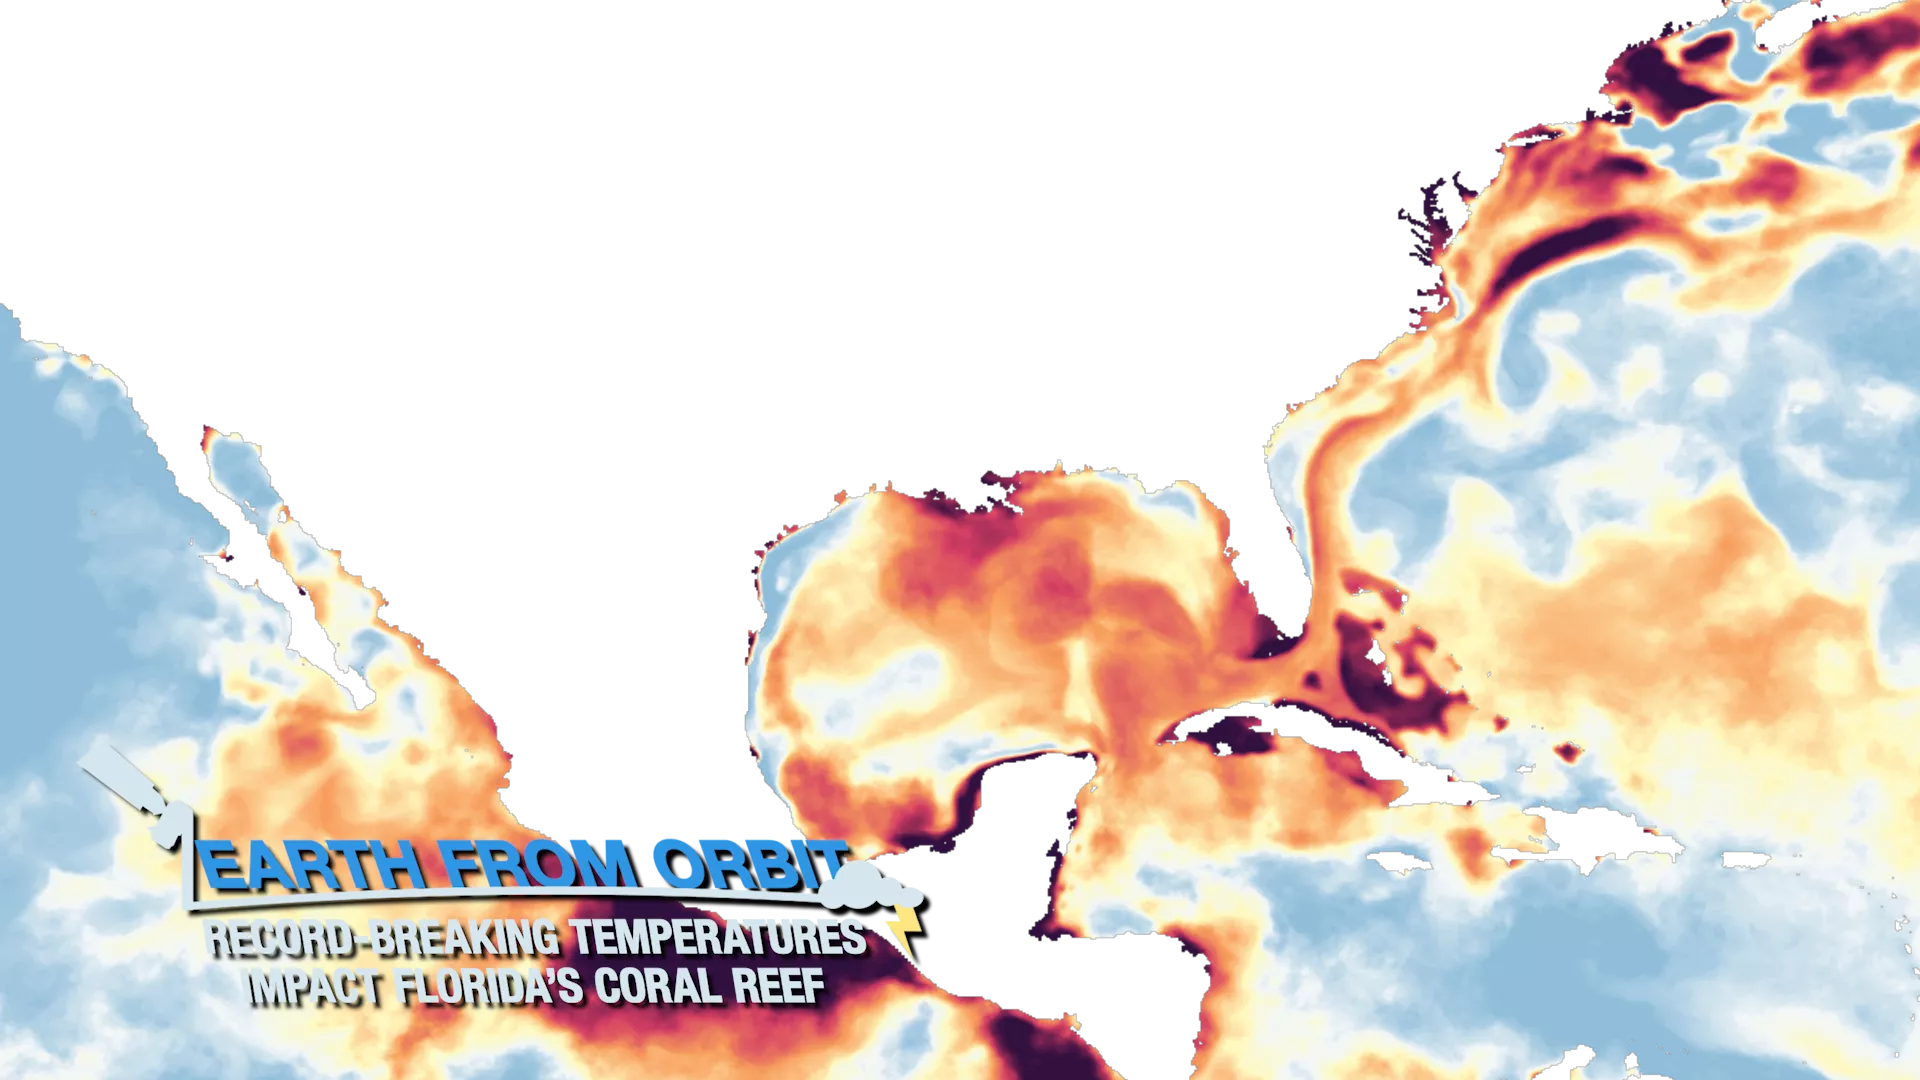 Extreme Ocean Temperatures Are Affecting Florida’s Coral Reef